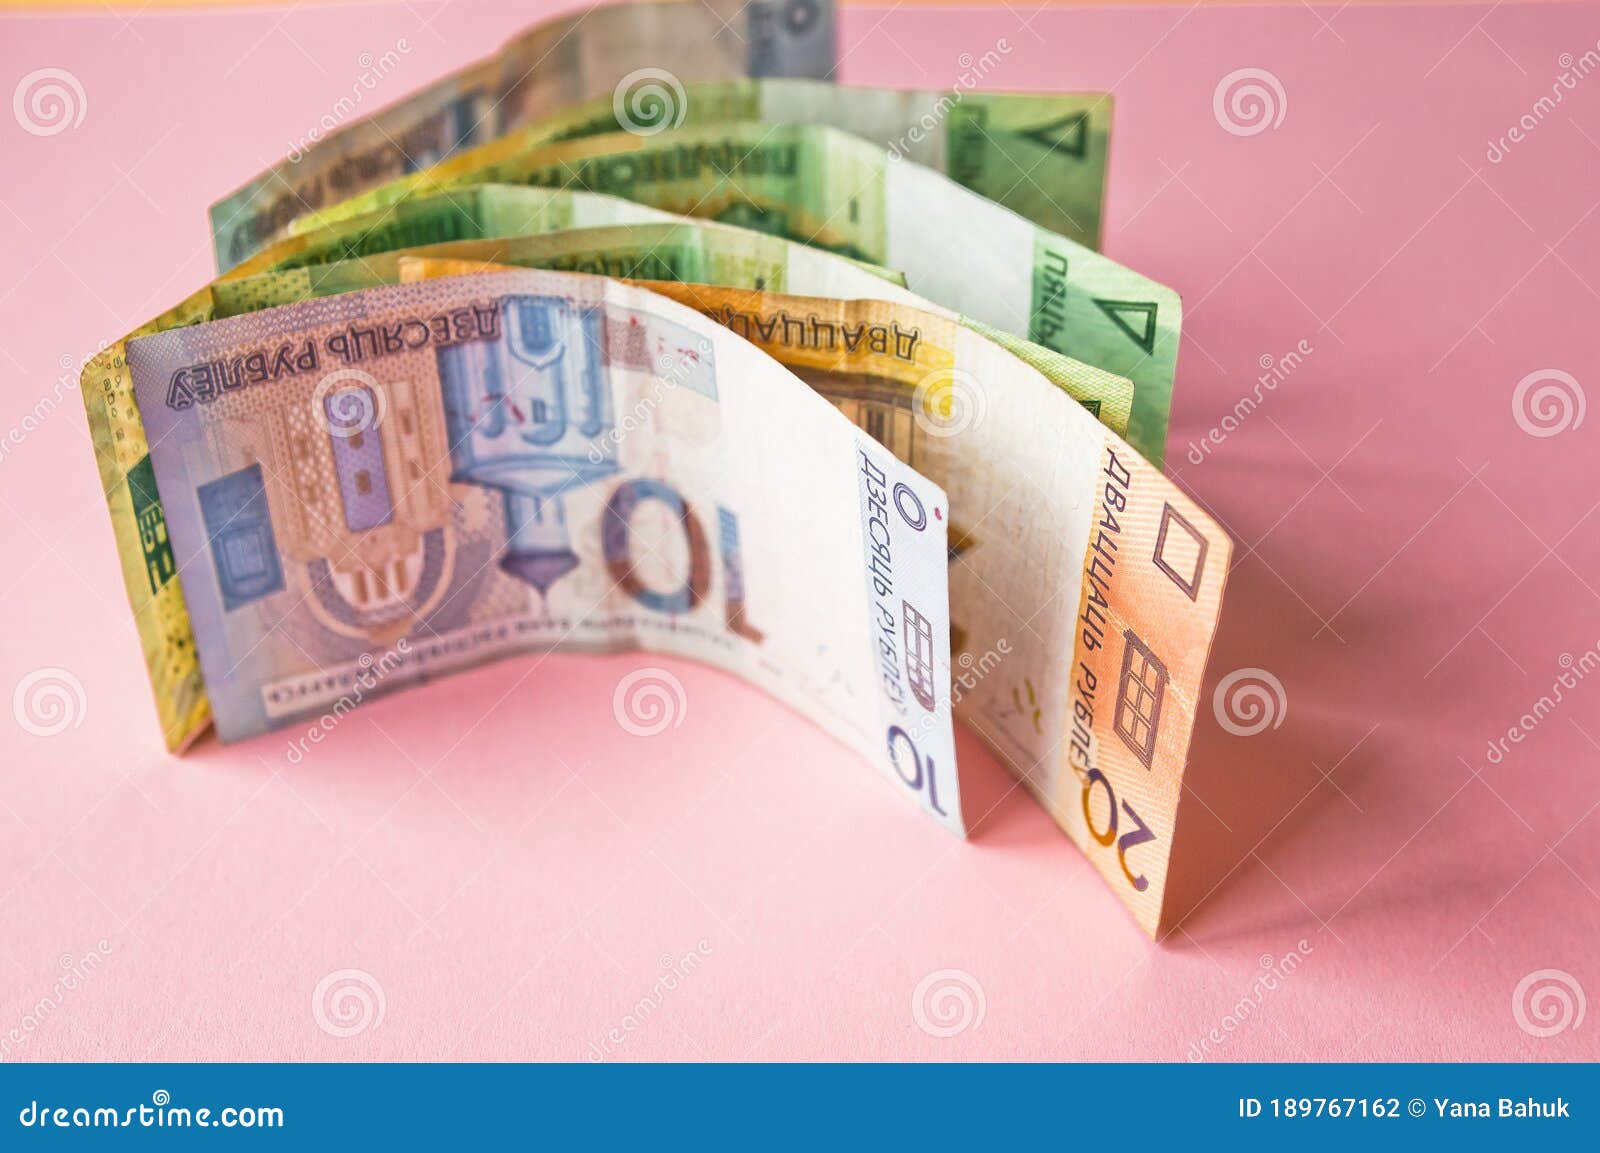 belarusian rubles and coins on a colored background